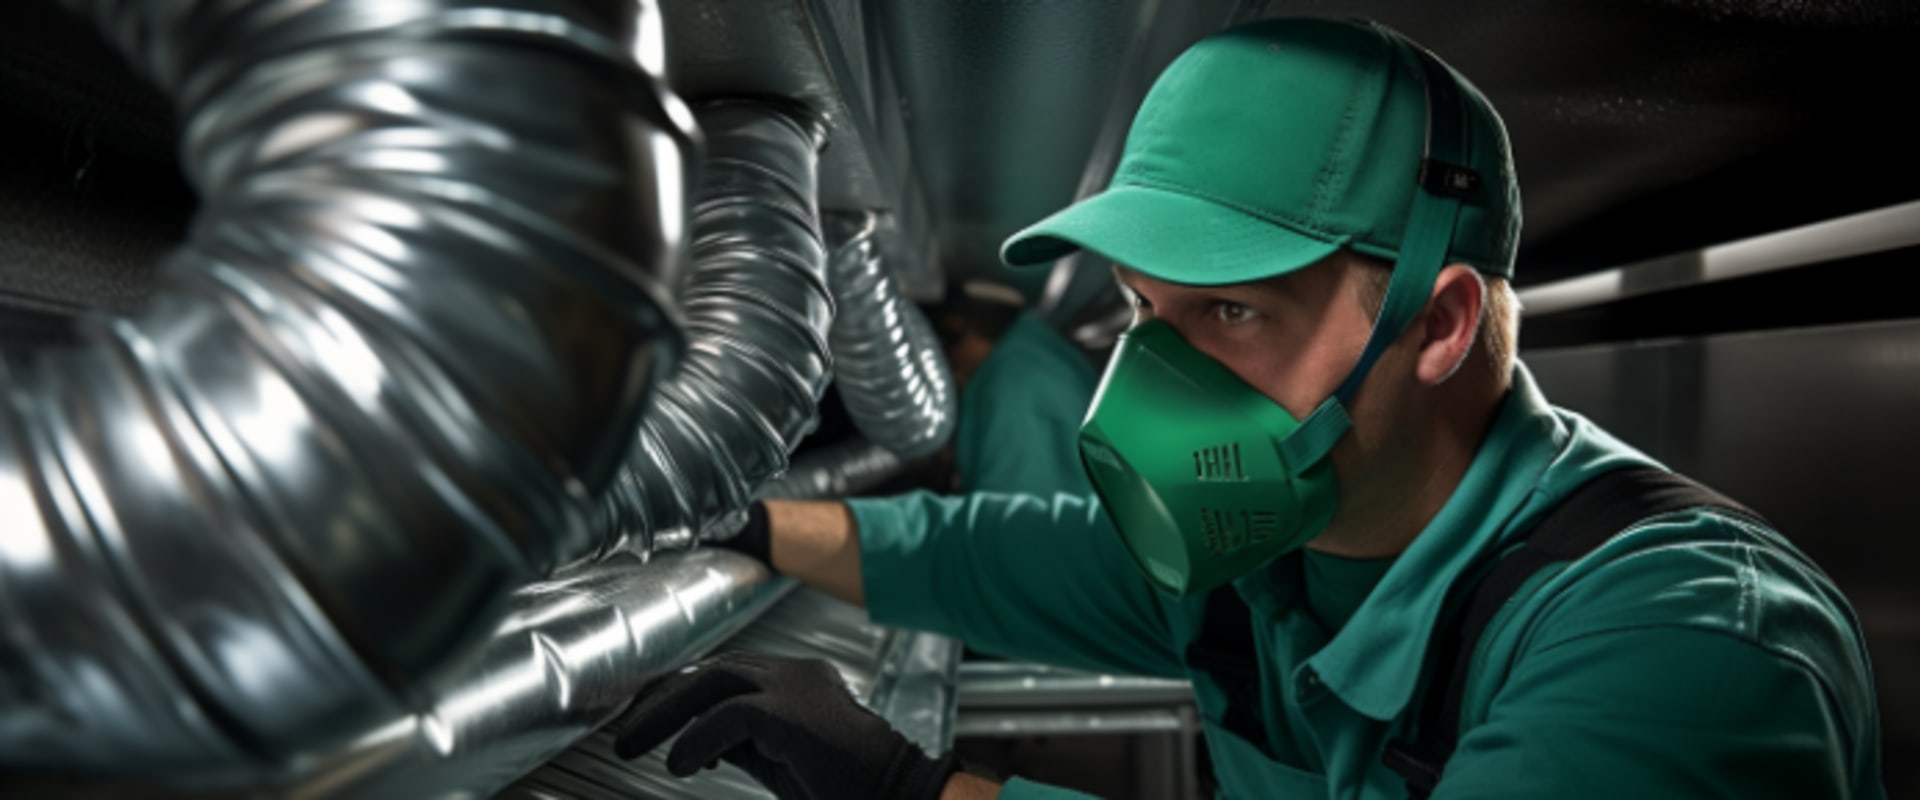 Tips for Choosing the Right Air Duct Sealing in Parkland FL